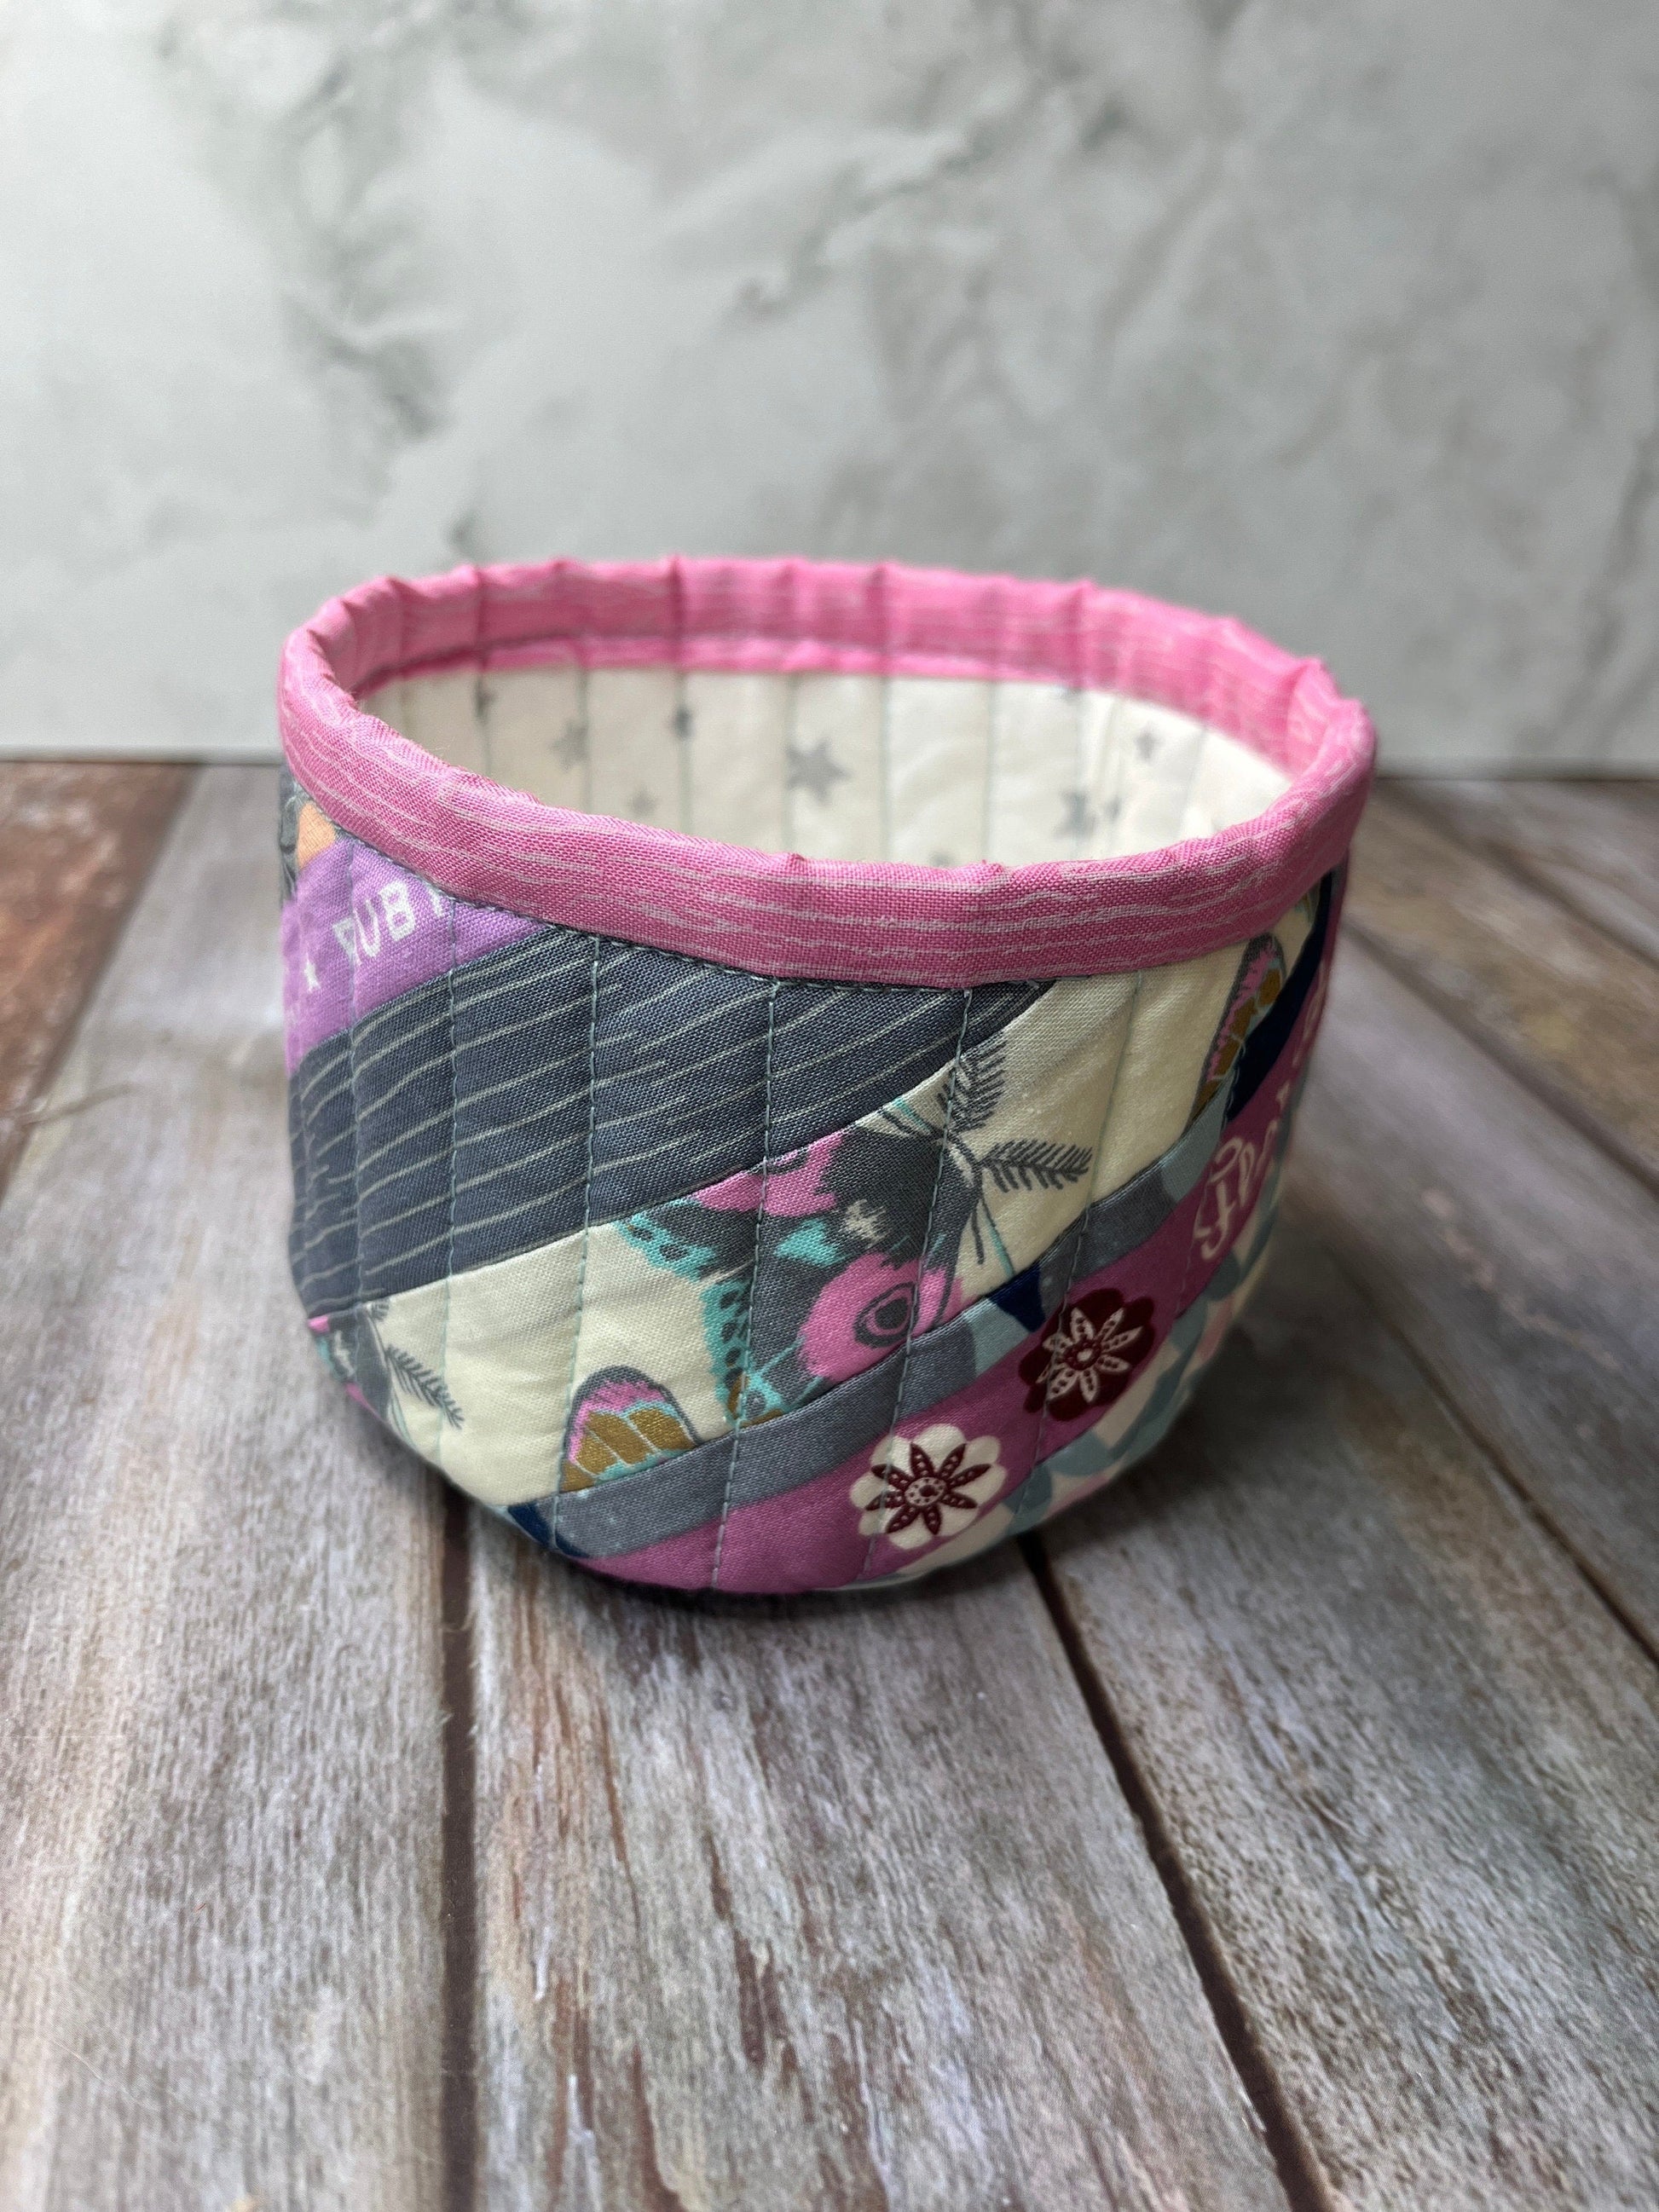 Small Fabric Tub Limited Edition No S202402 - Uphouse Crafts